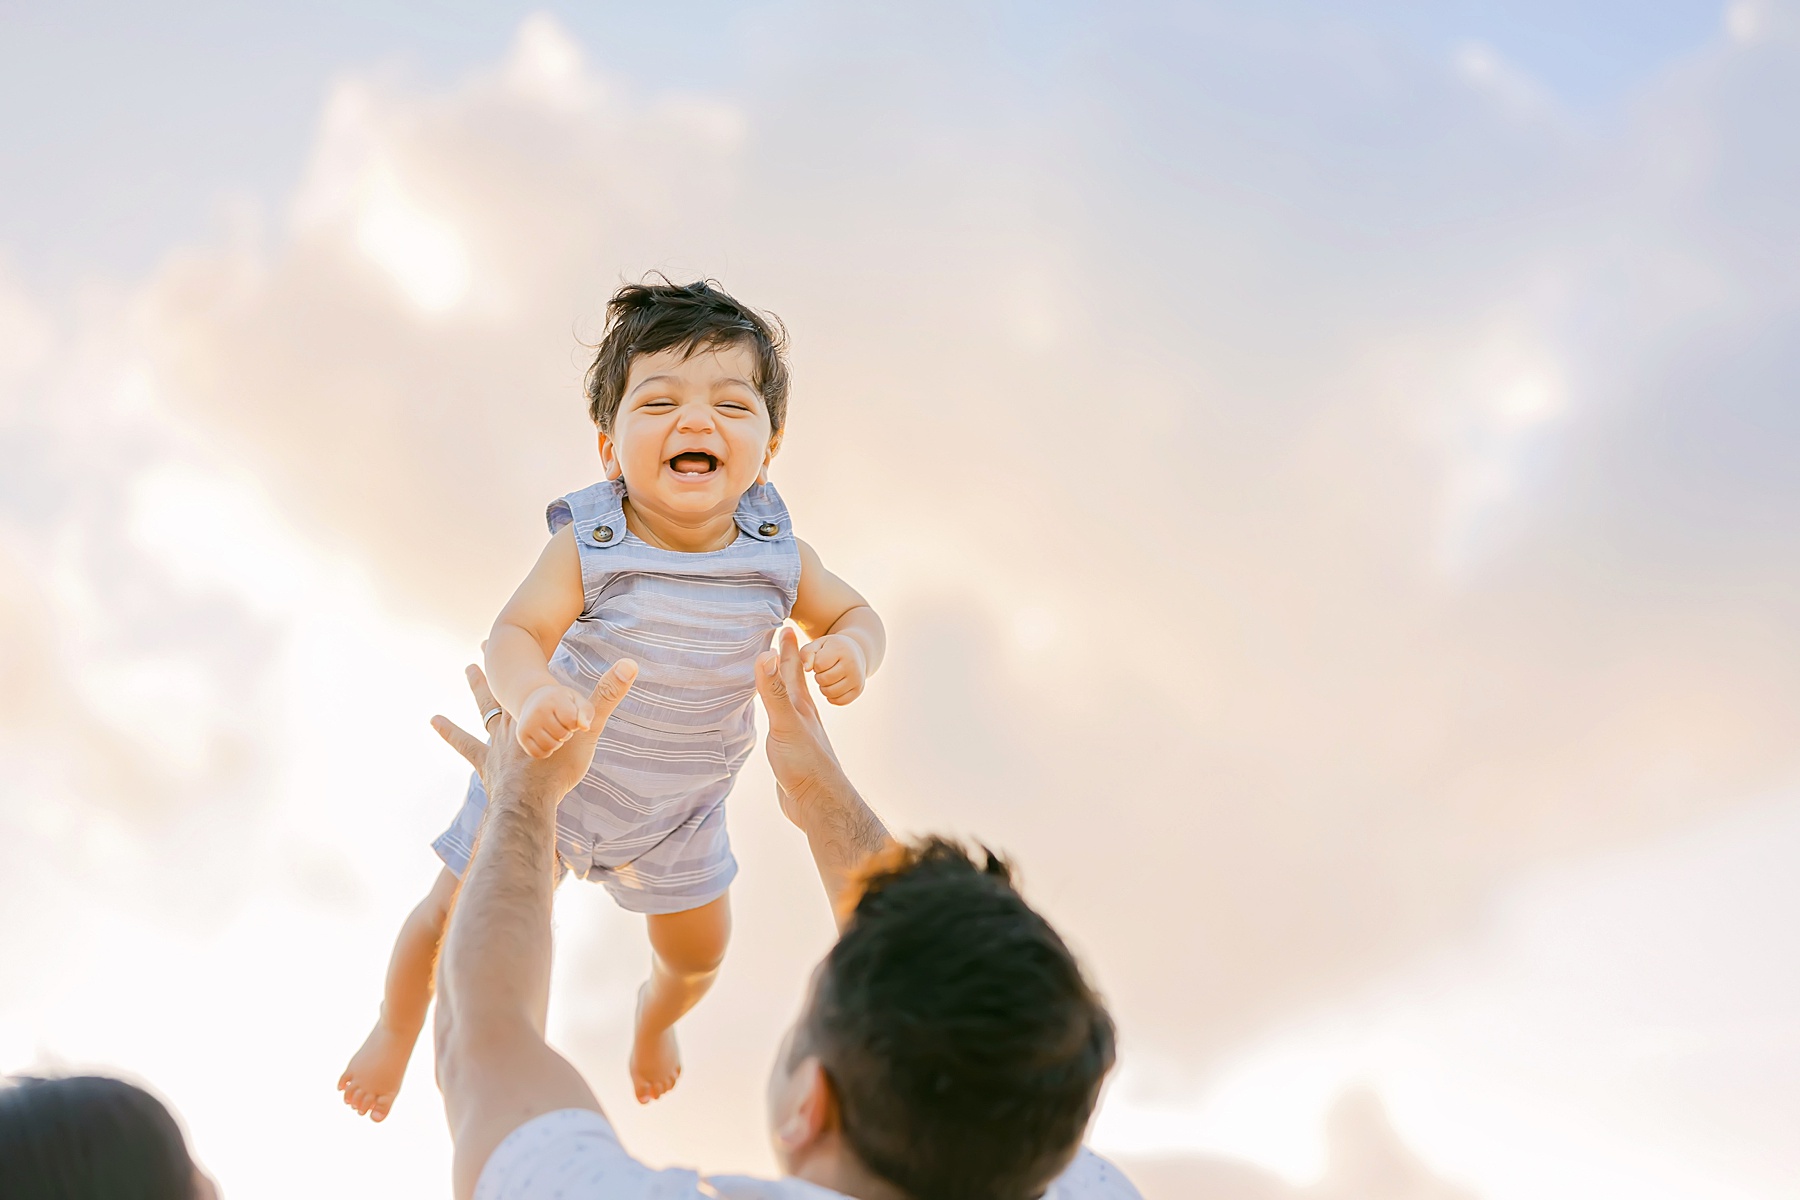 baby being thrown in air on beach by dad wearing blue overalls